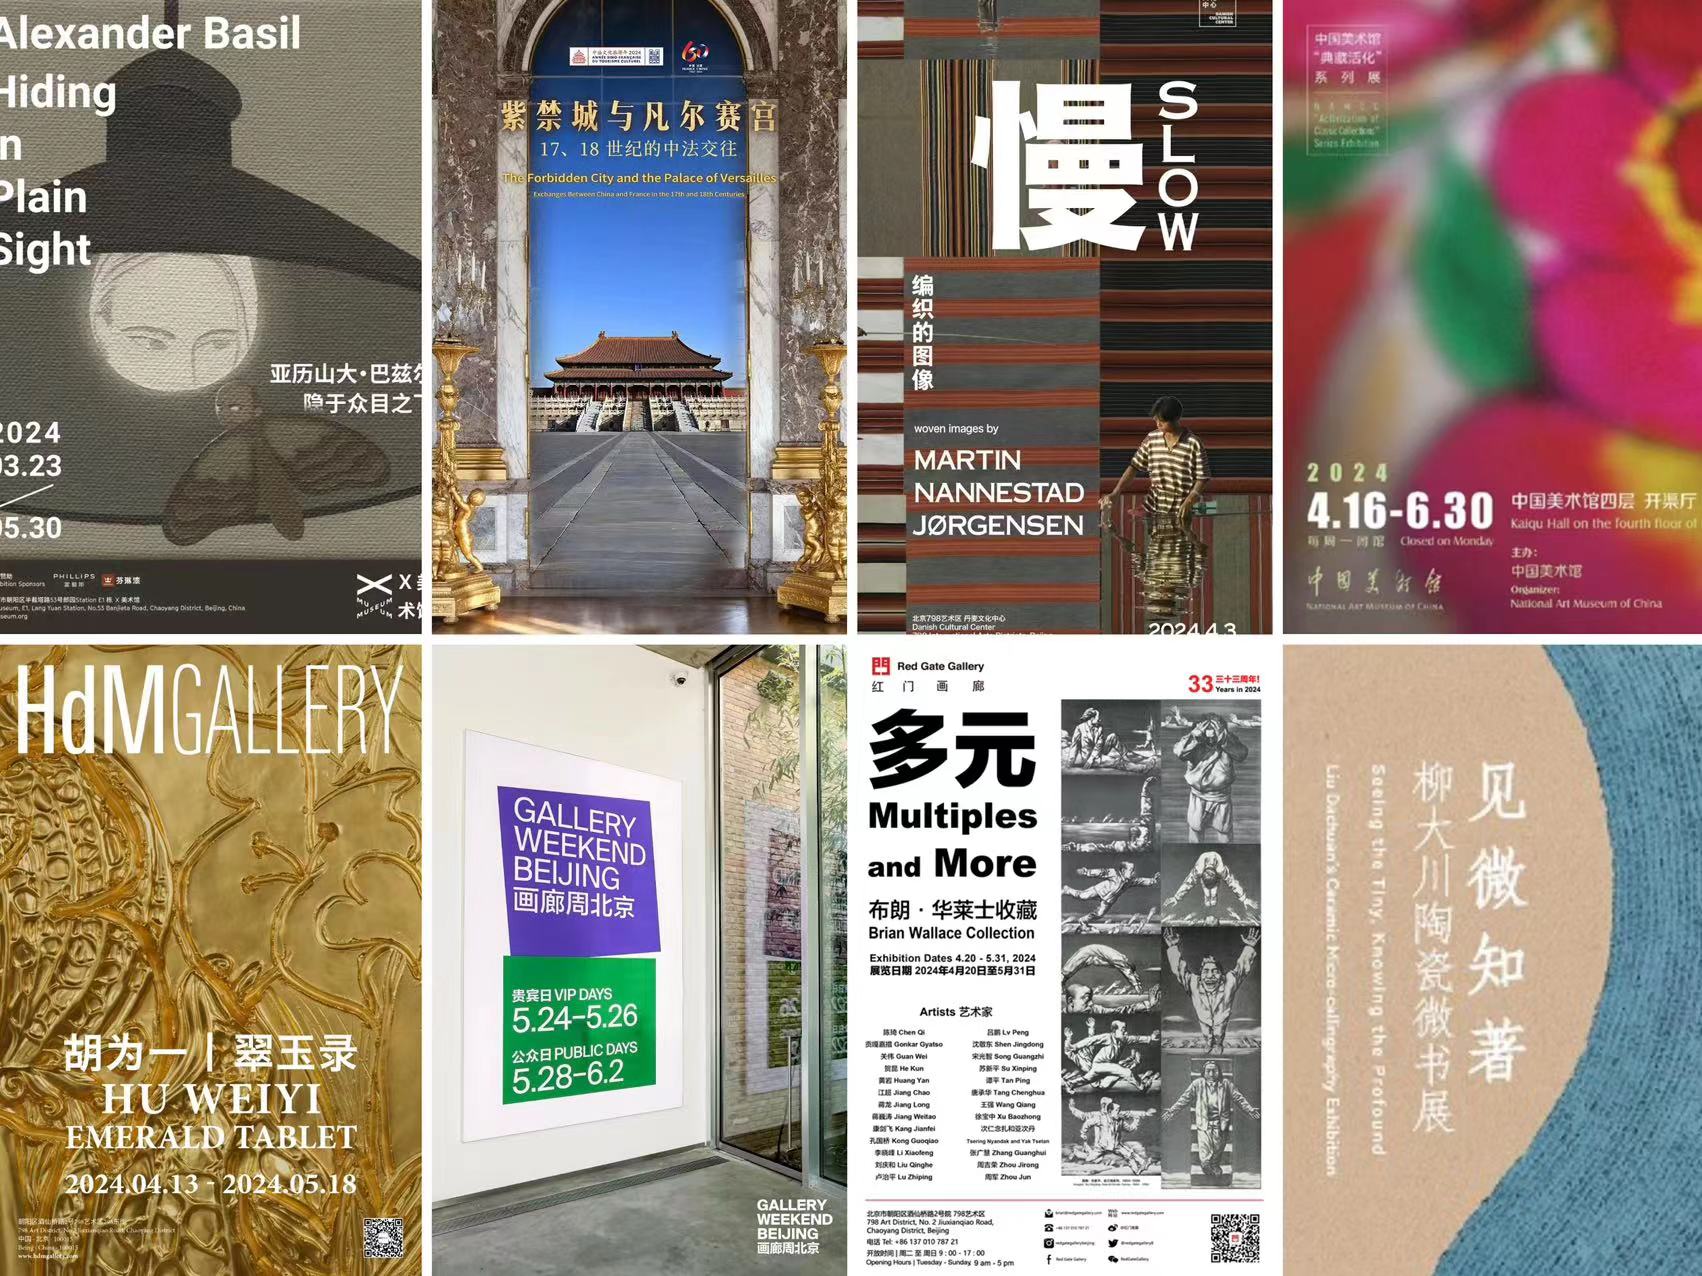 22 Amazing Art Shows This May in Beijing